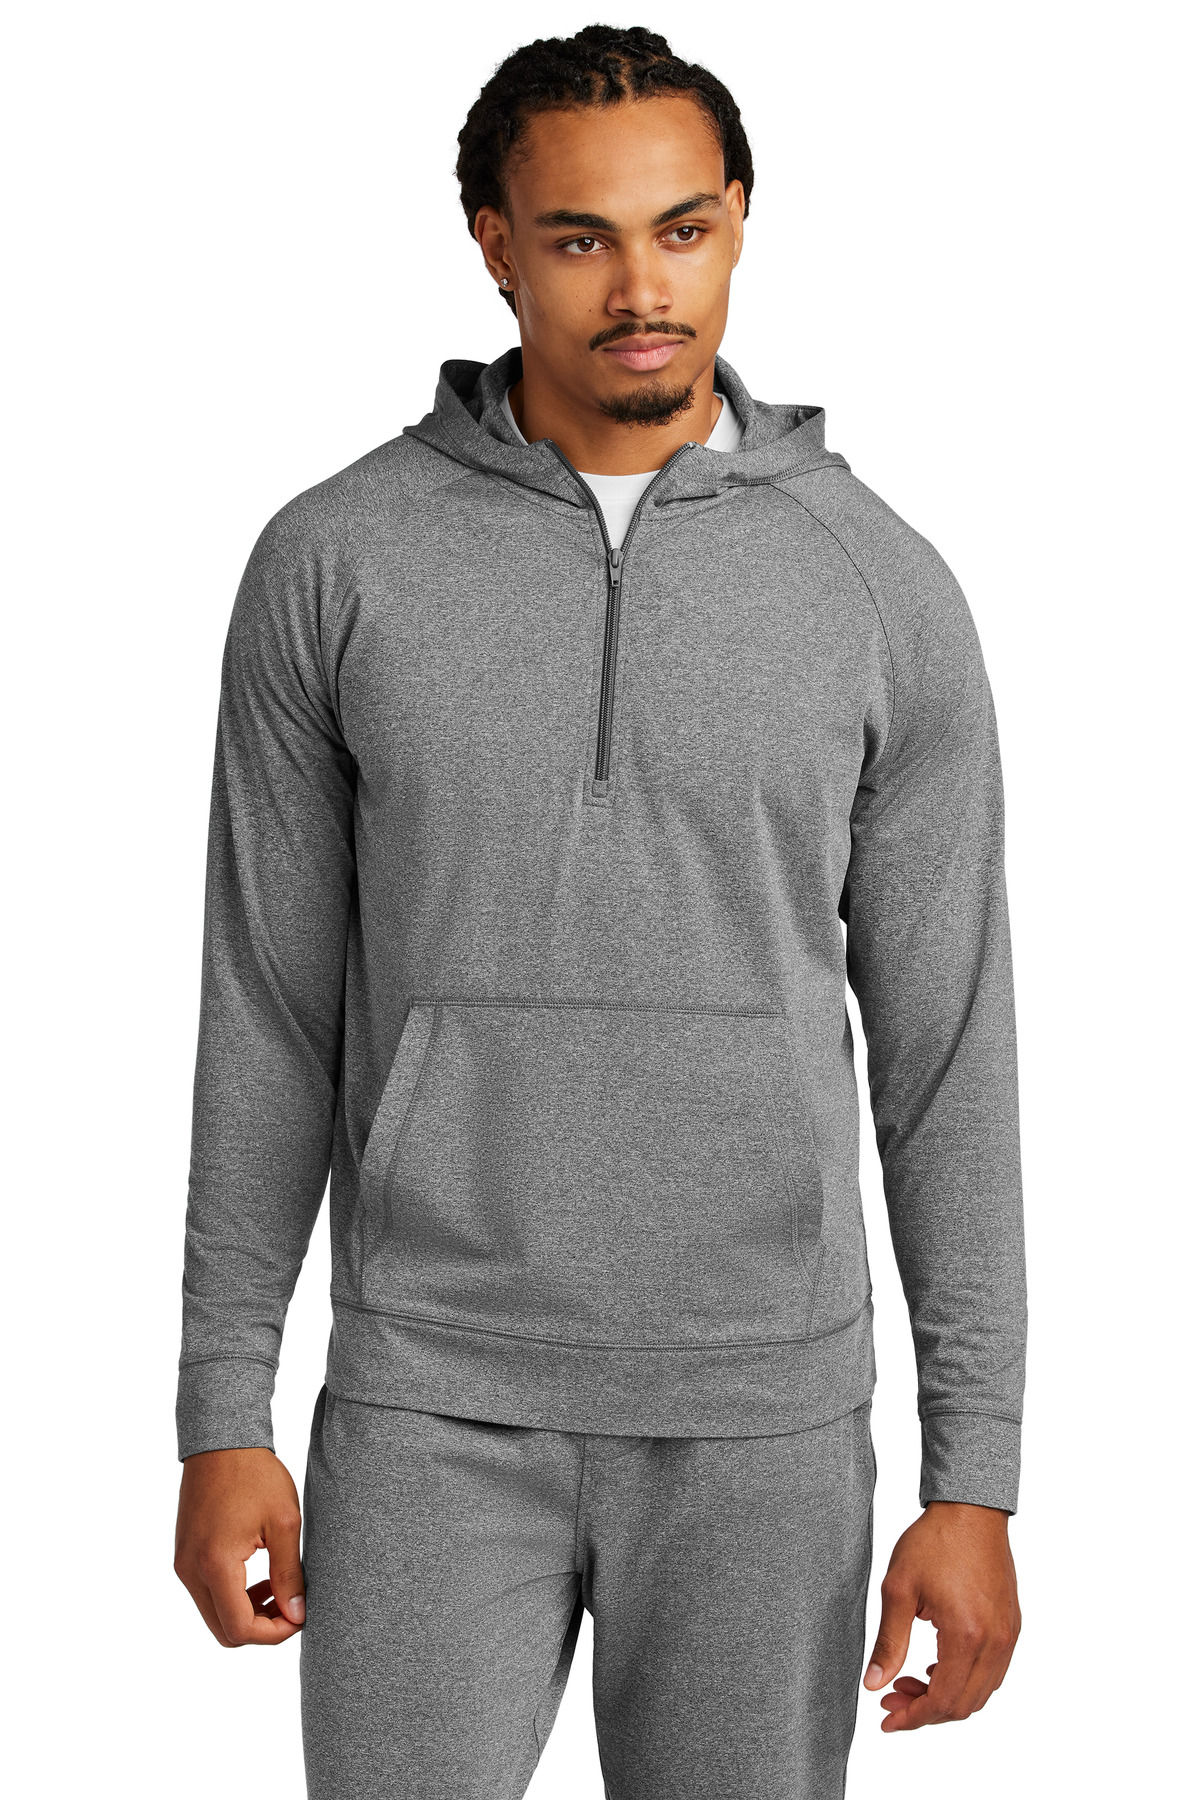 click to view Charcoal Grey Heather